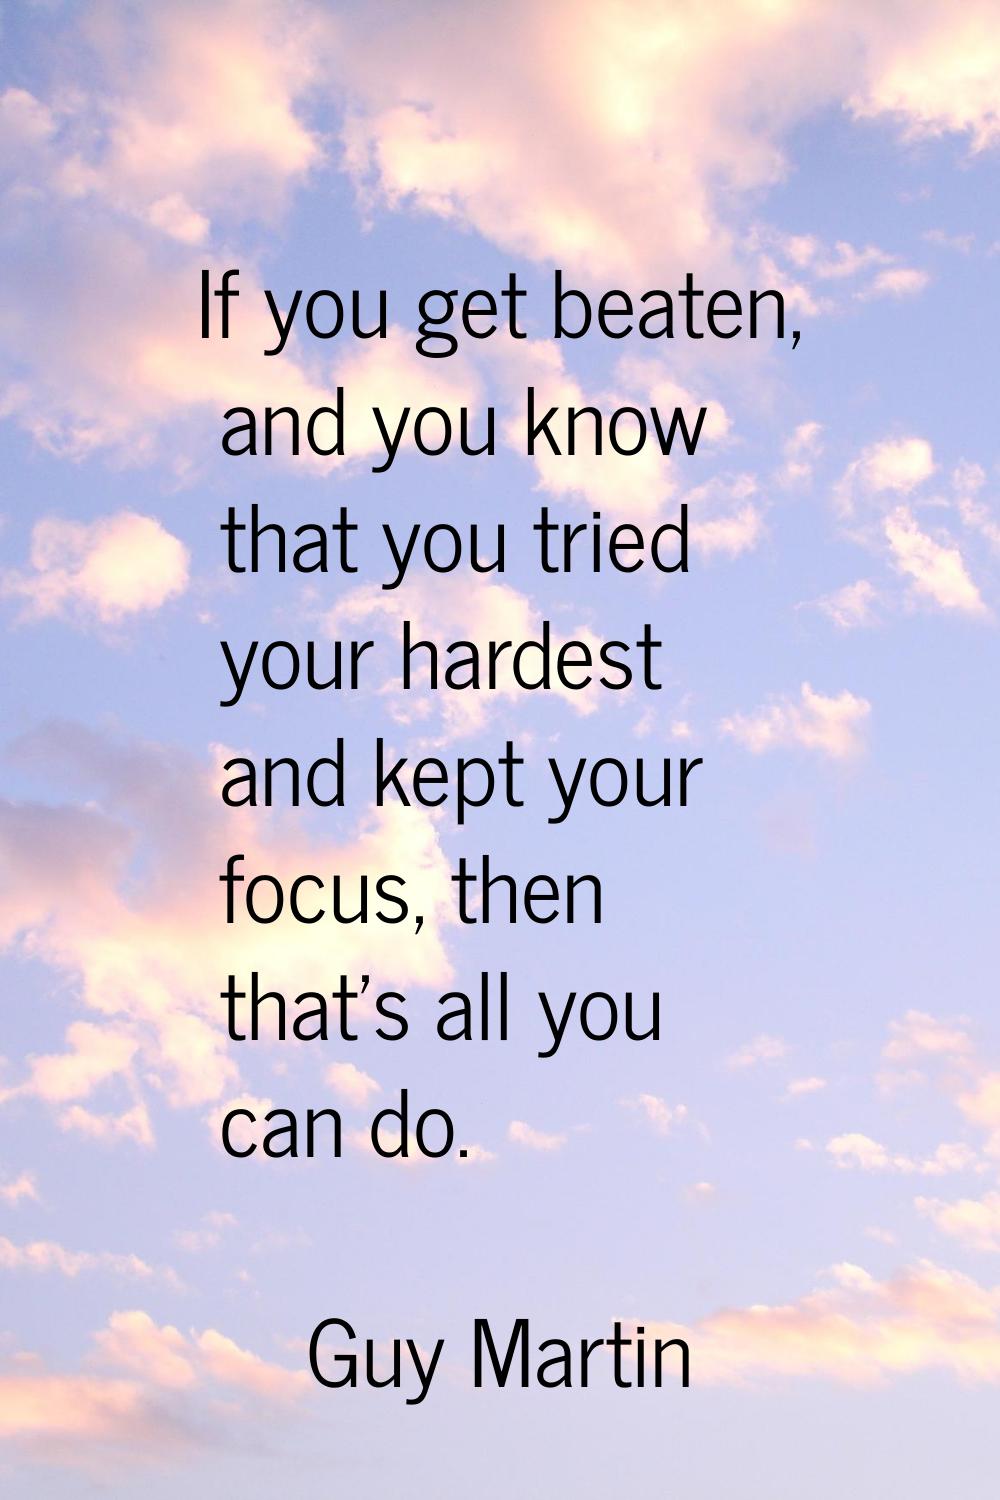 If you get beaten, and you know that you tried your hardest and kept your focus, then that's all yo